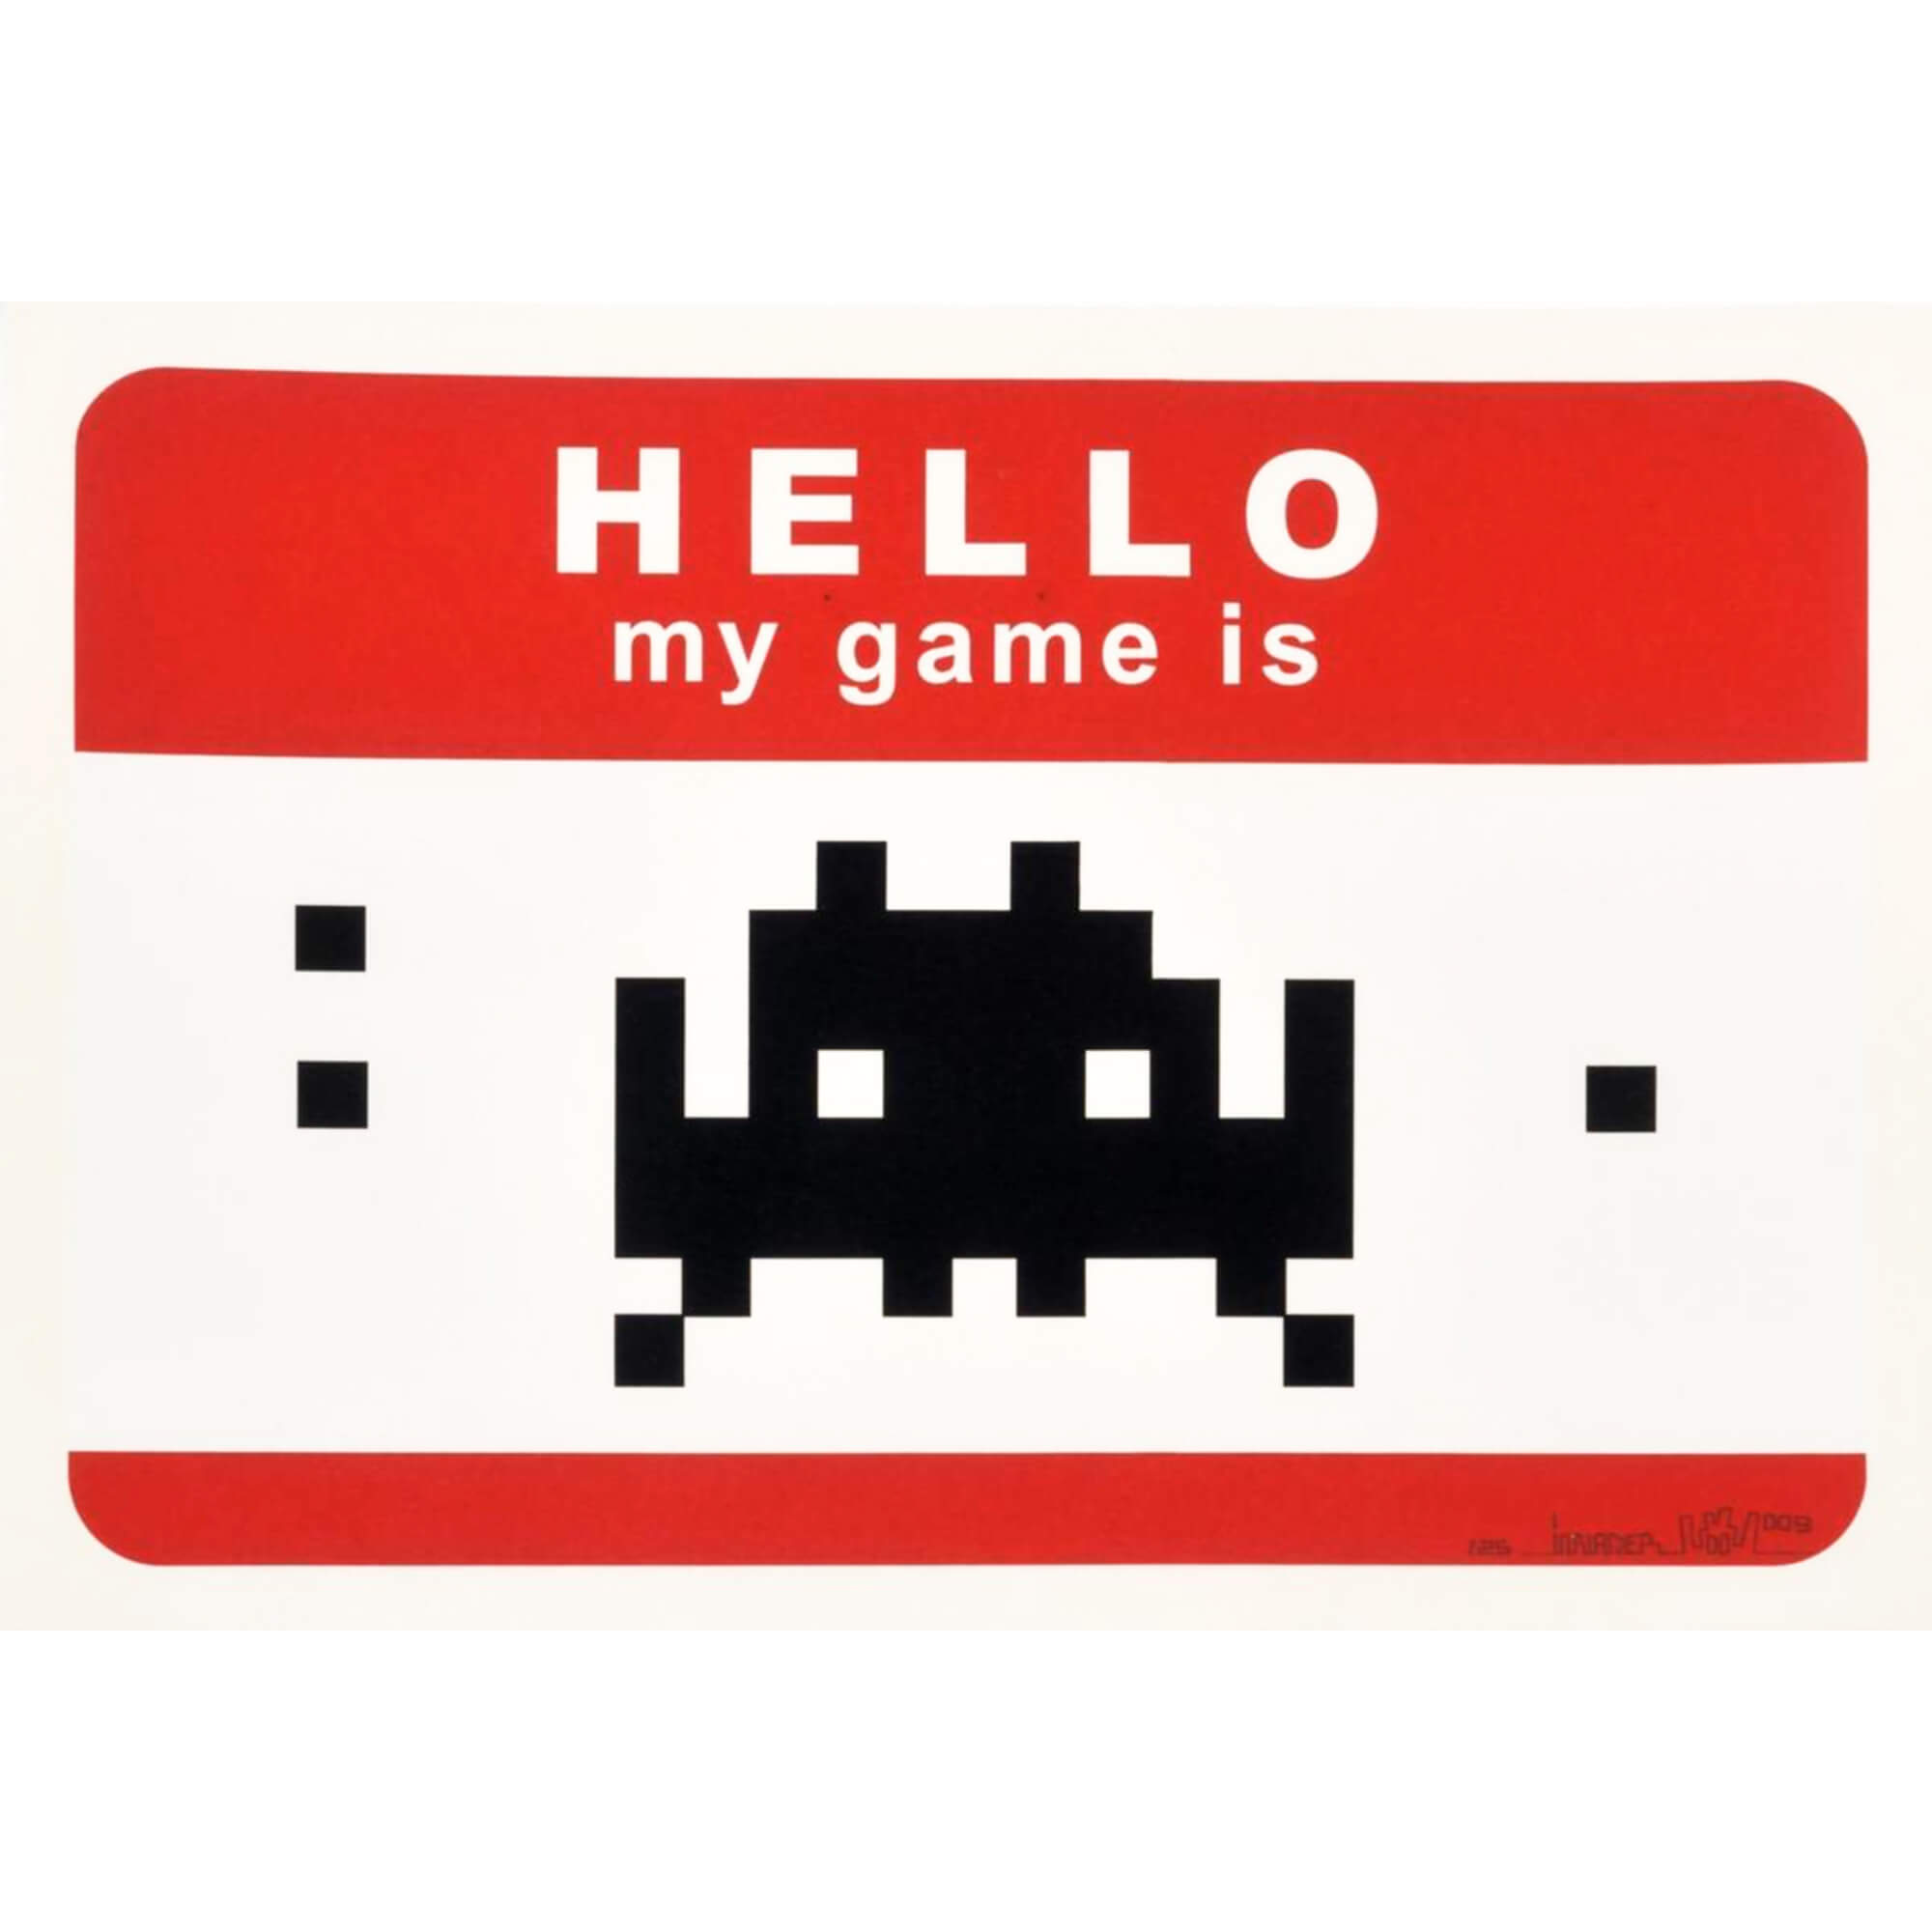 Invader-Hello My Game Is (red) - Invader-art print